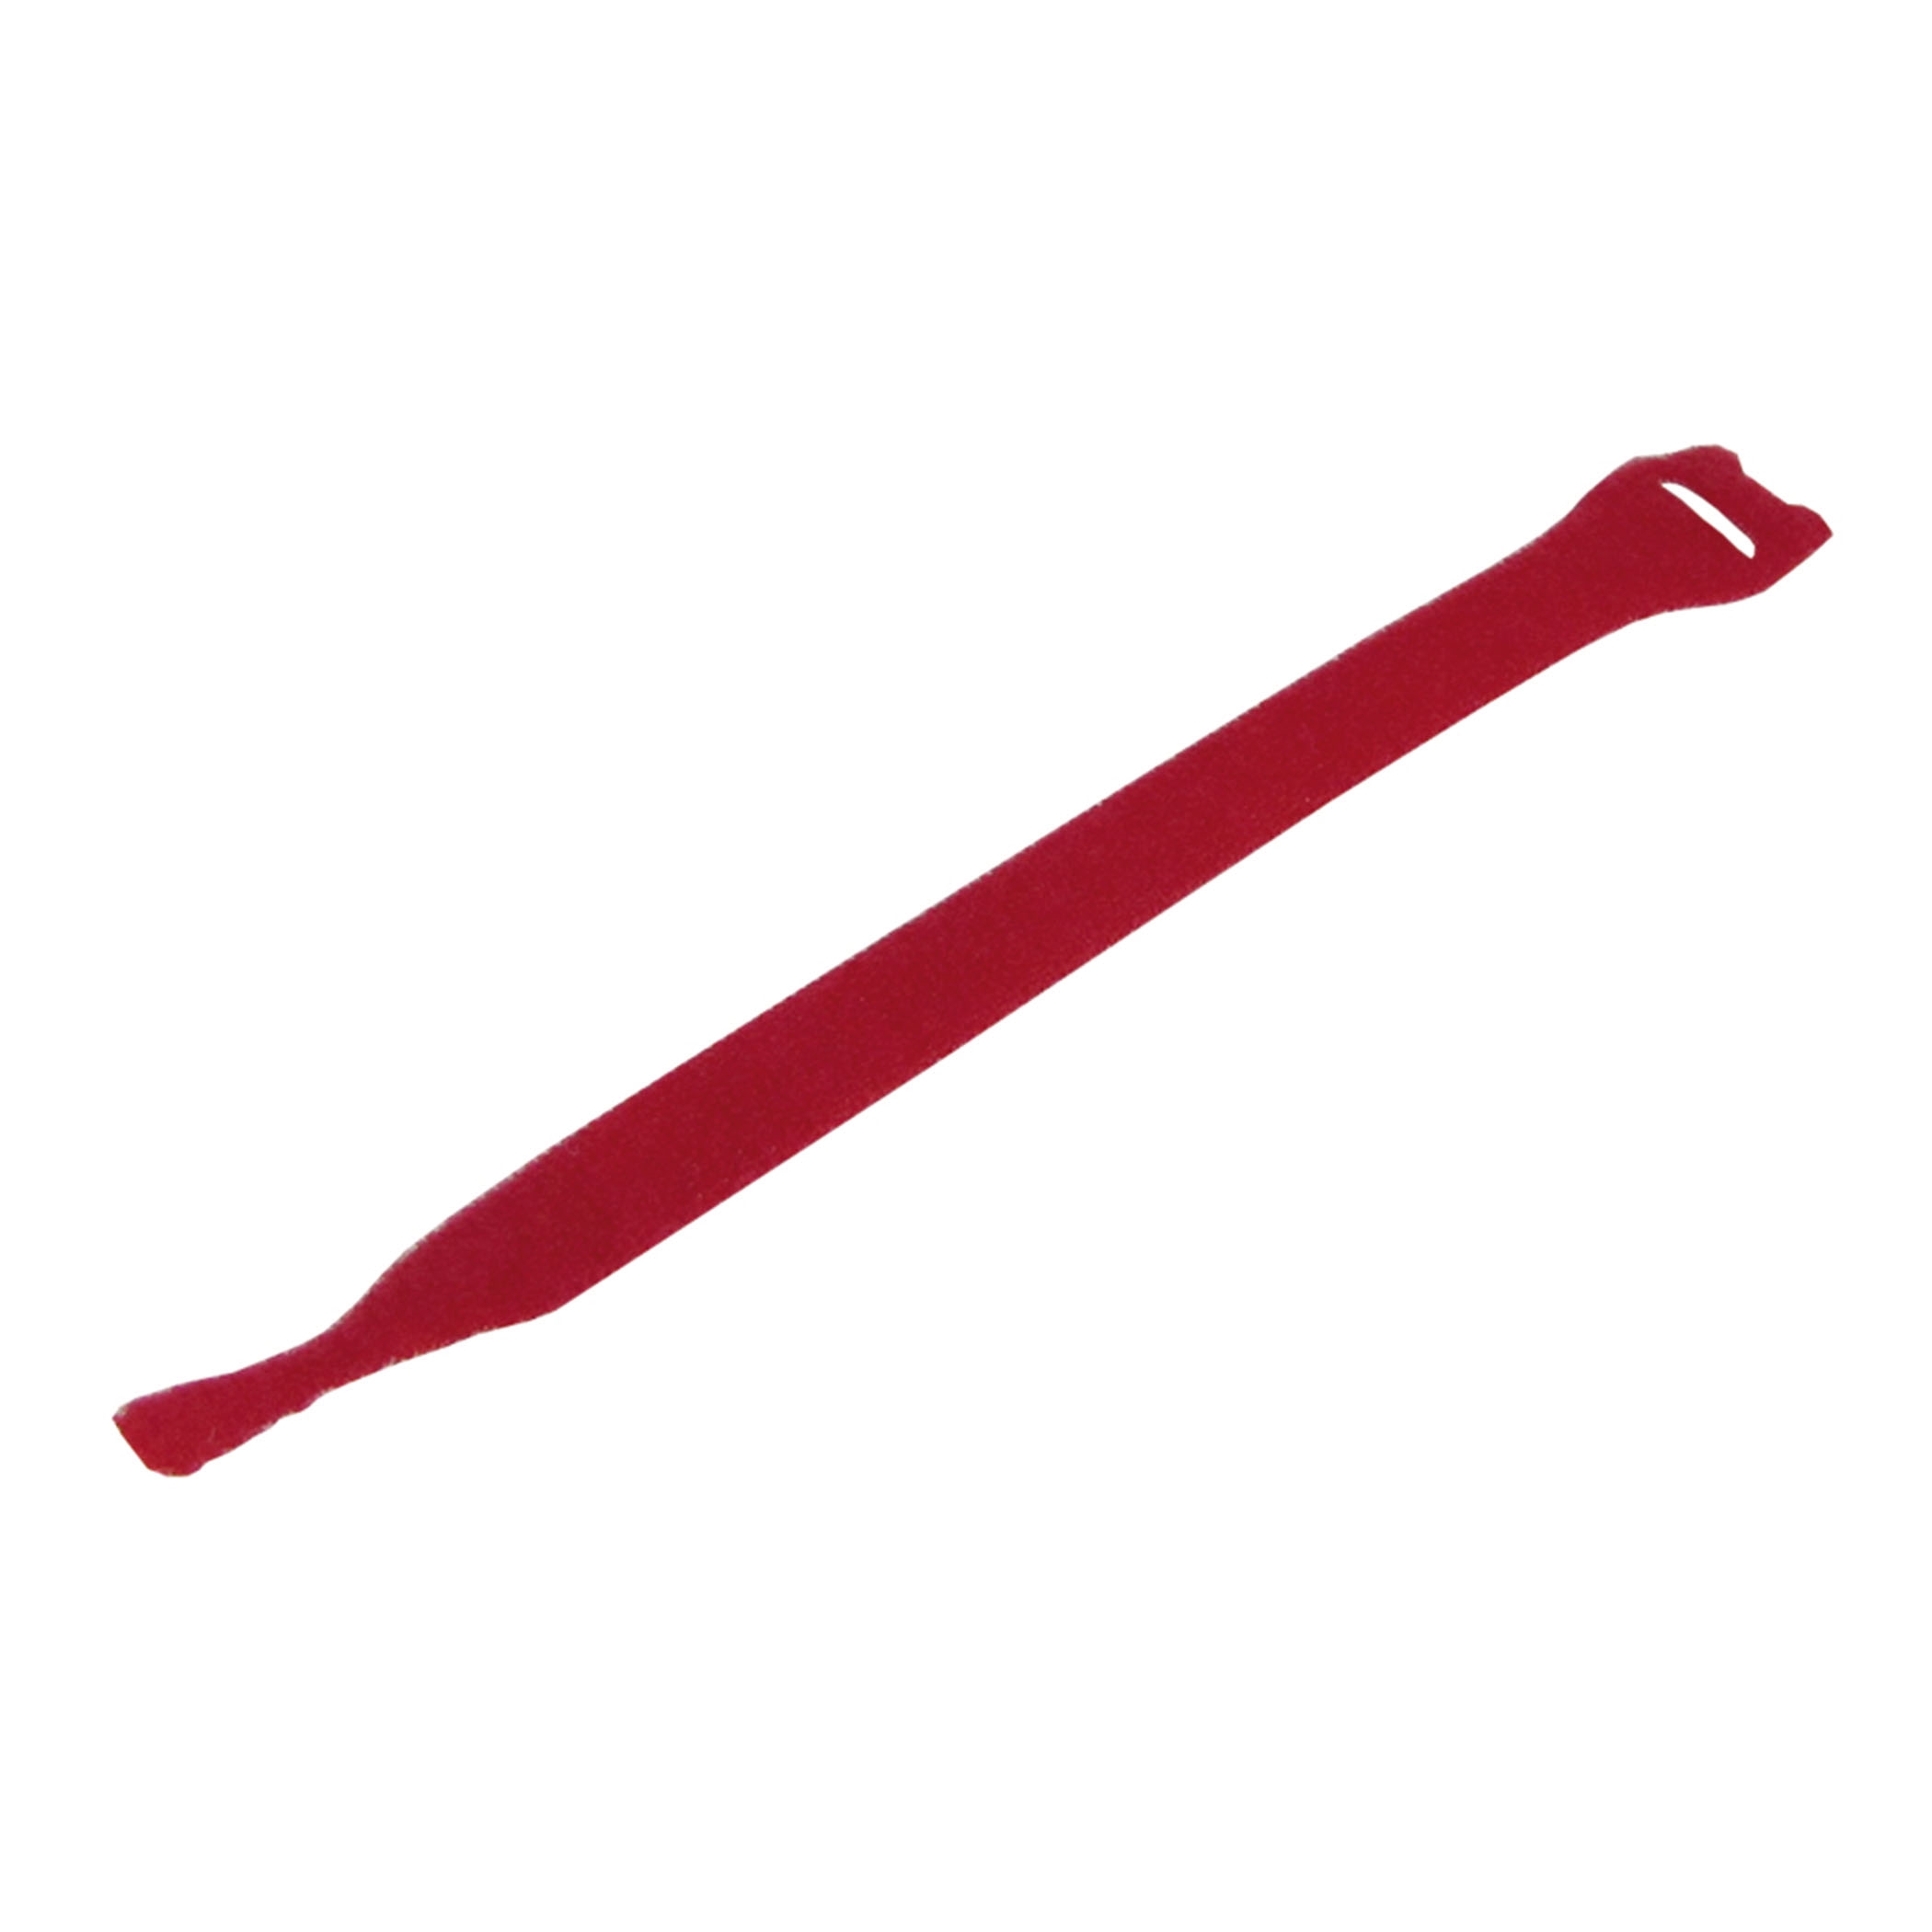 Cable Tie Red - t1513-300rh